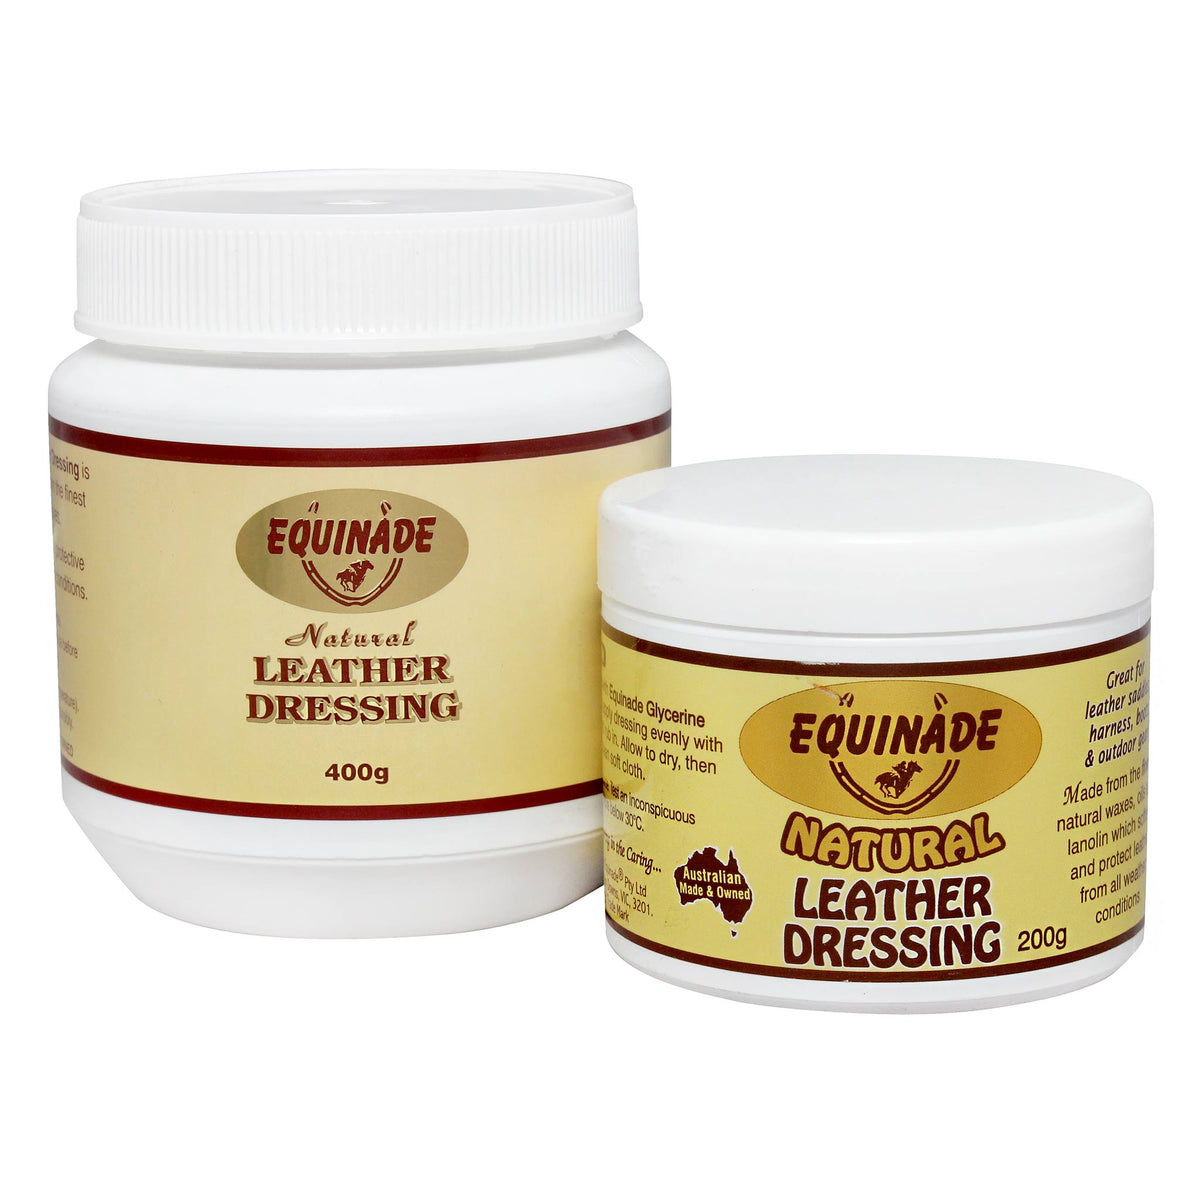 Equinade Natural Leather Dressing